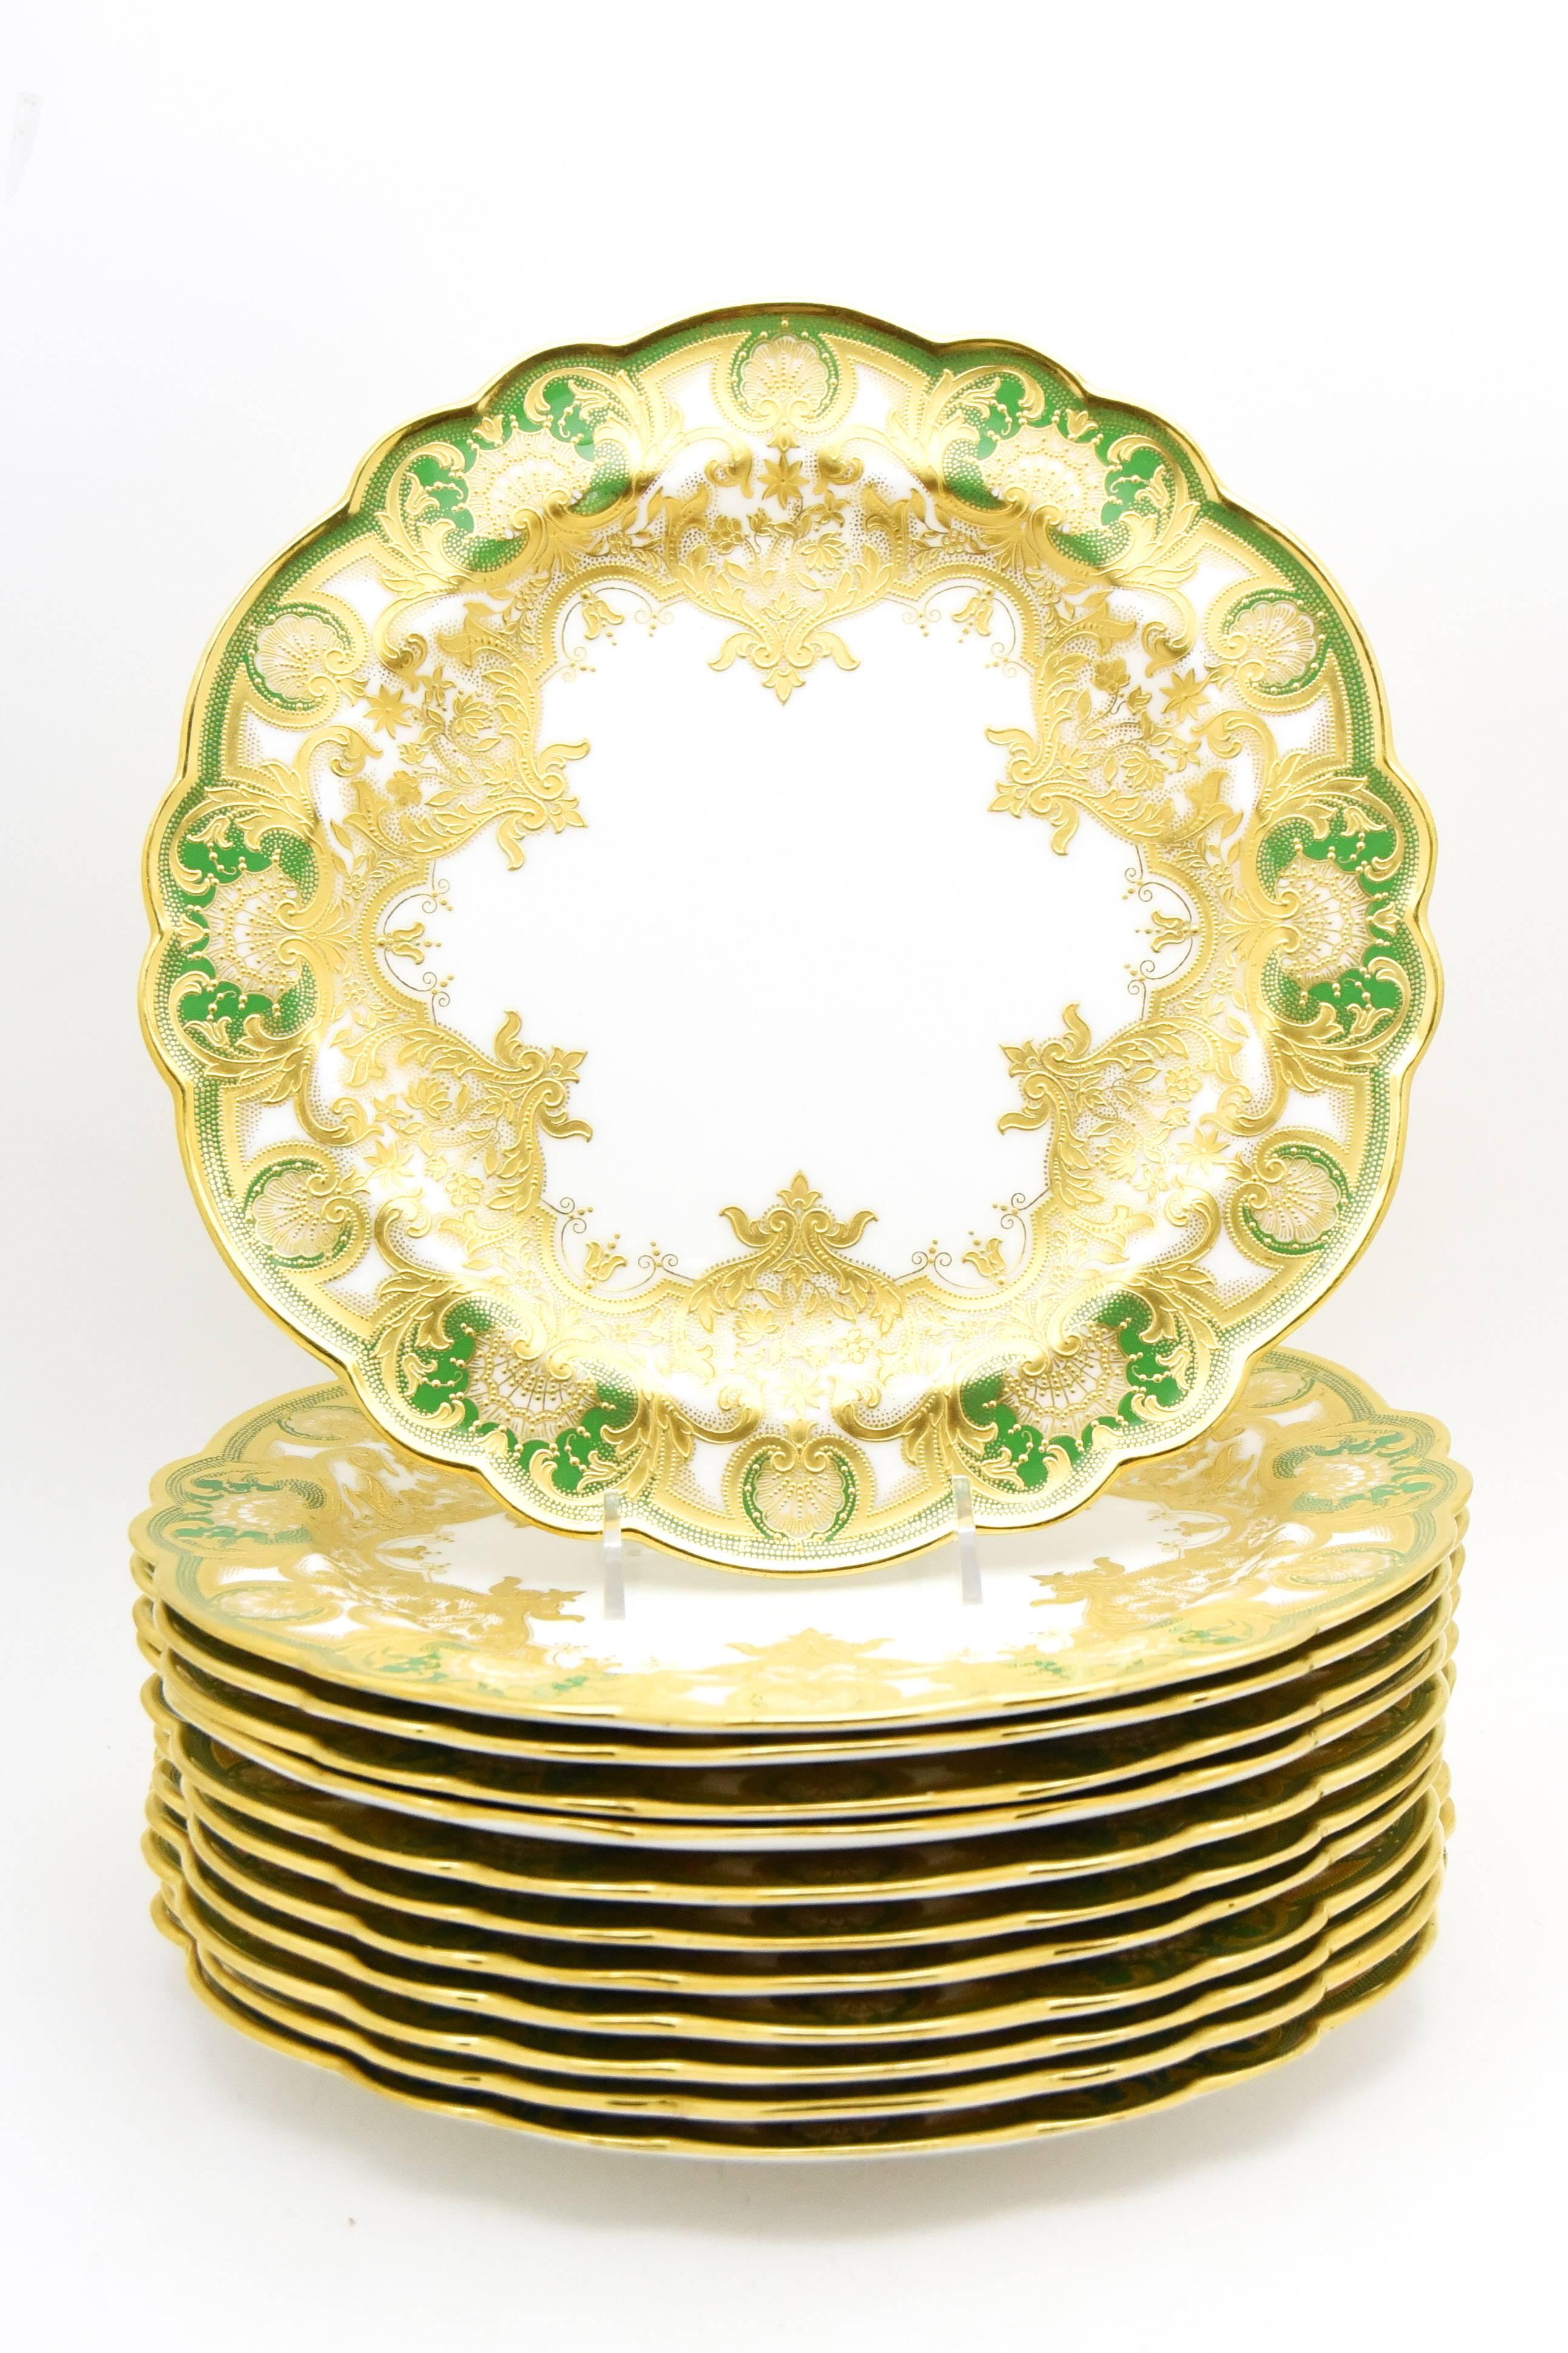 This is a set of 12 breathtakingly beautiful dinner plates made by Royal Worcester exclusivlely for A.B. Daniell & Son, London. They have all the characteristics of their finest pieces-apple green enamels, shaped rims and masterfully applied raised